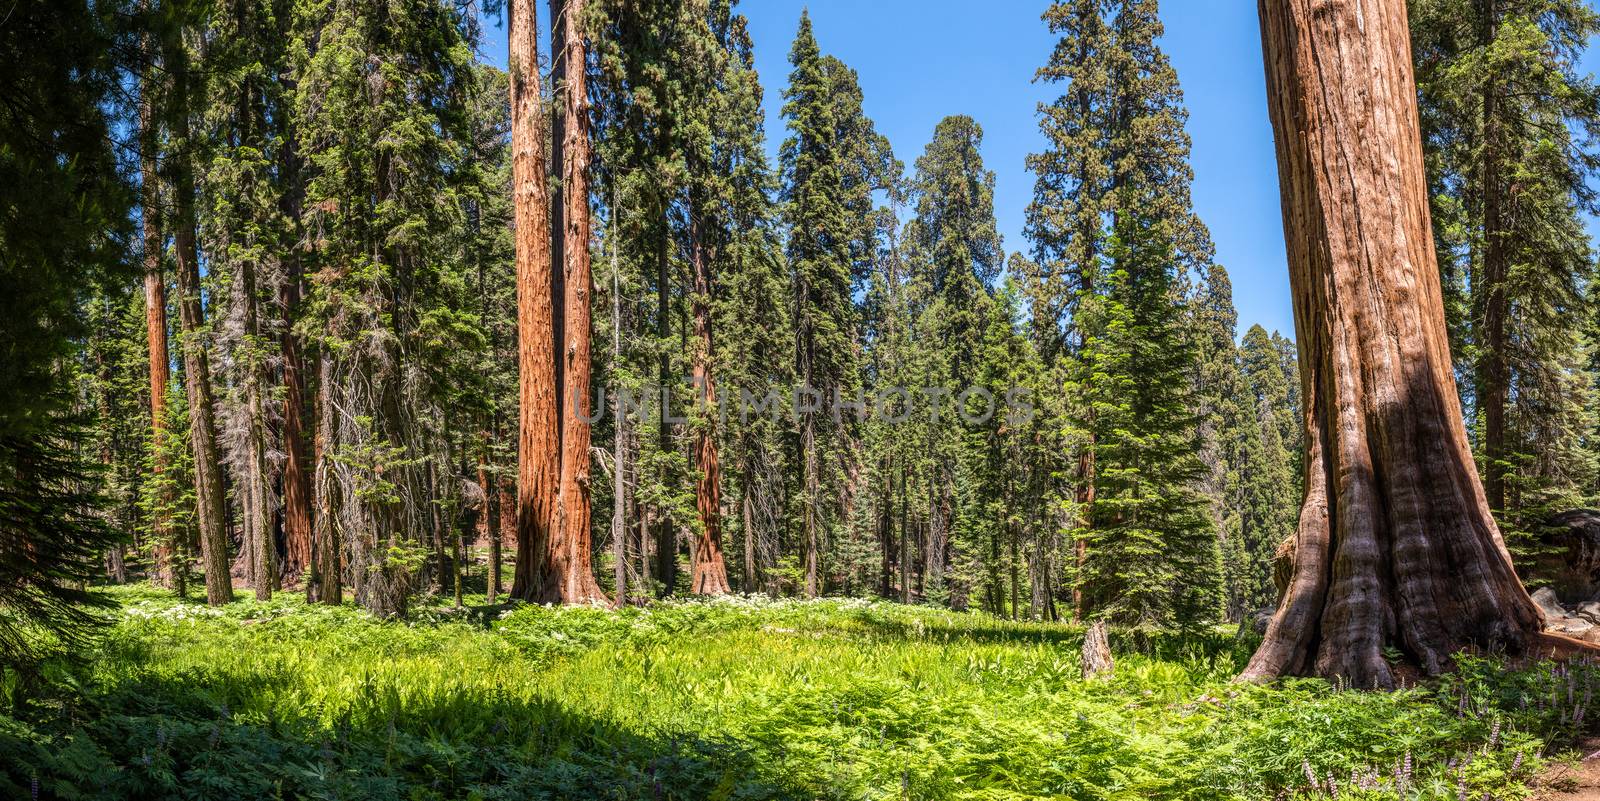 Crescent Meadow in Sequoia National Park, California by Njean